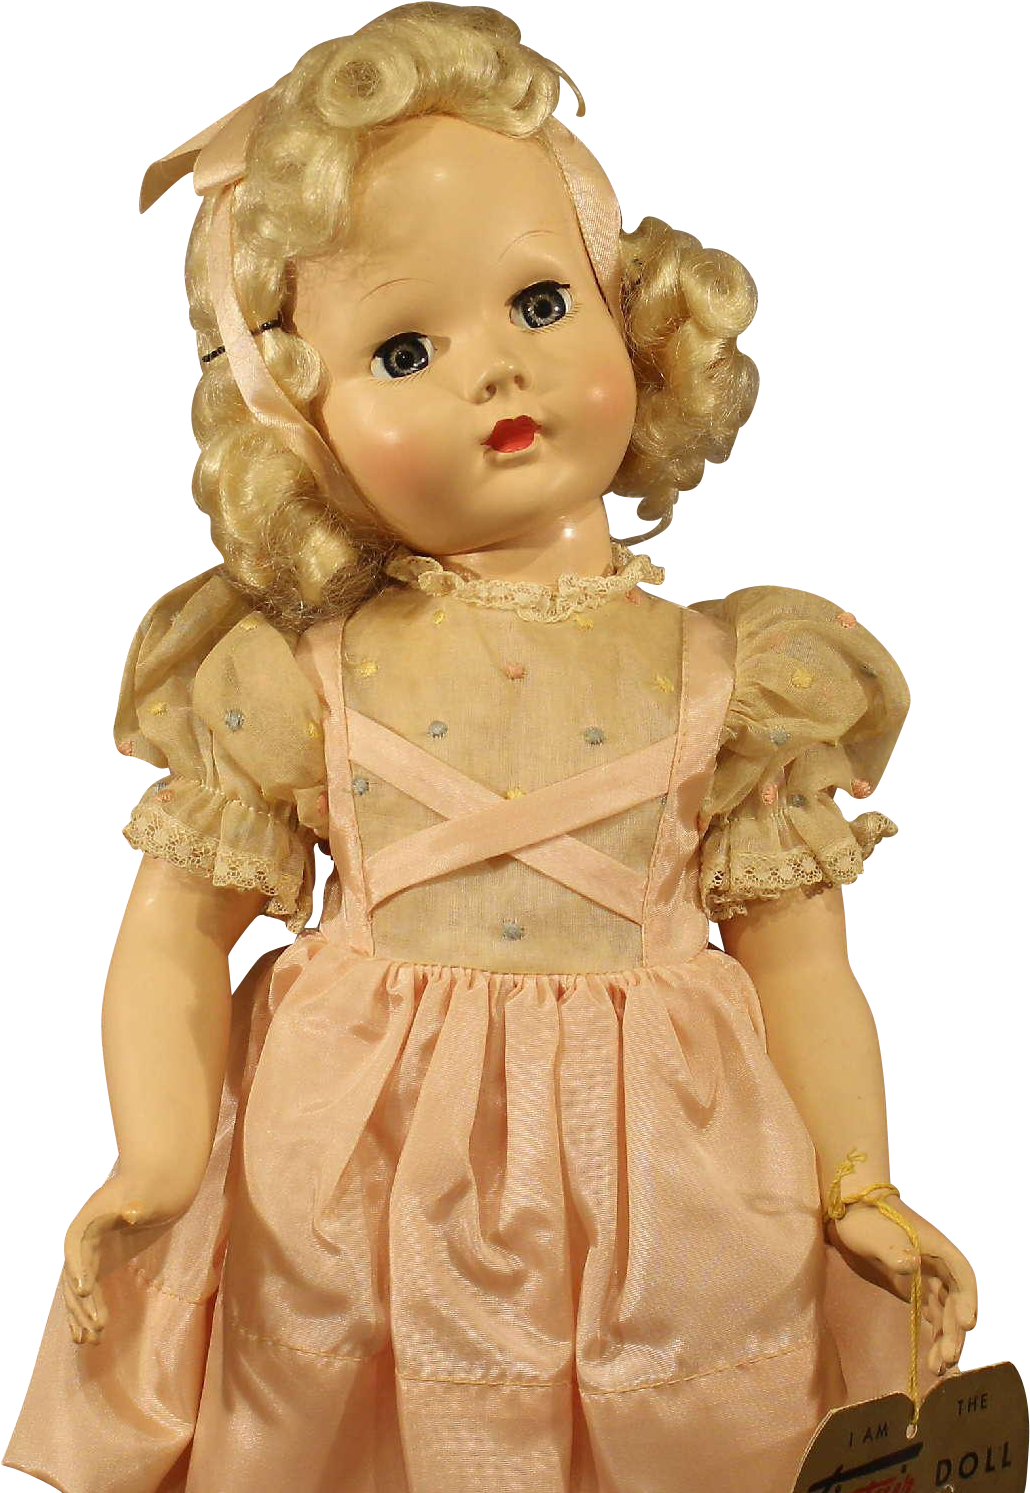 A Doll In A Pink Dress